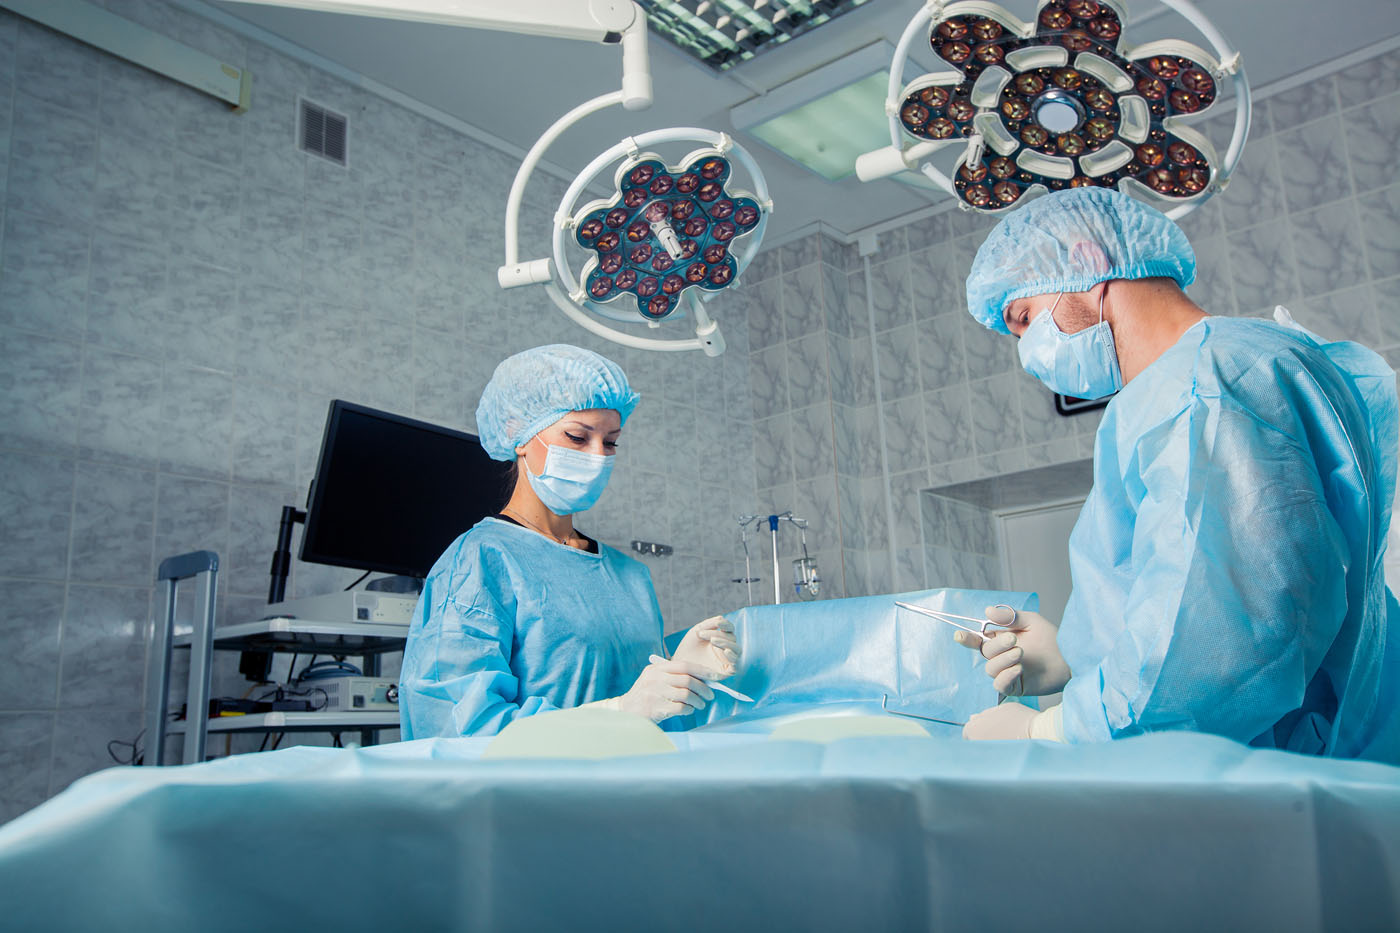 Does Your OR Offer Sufficient Access to Surgeons Practicing in Your Facility?